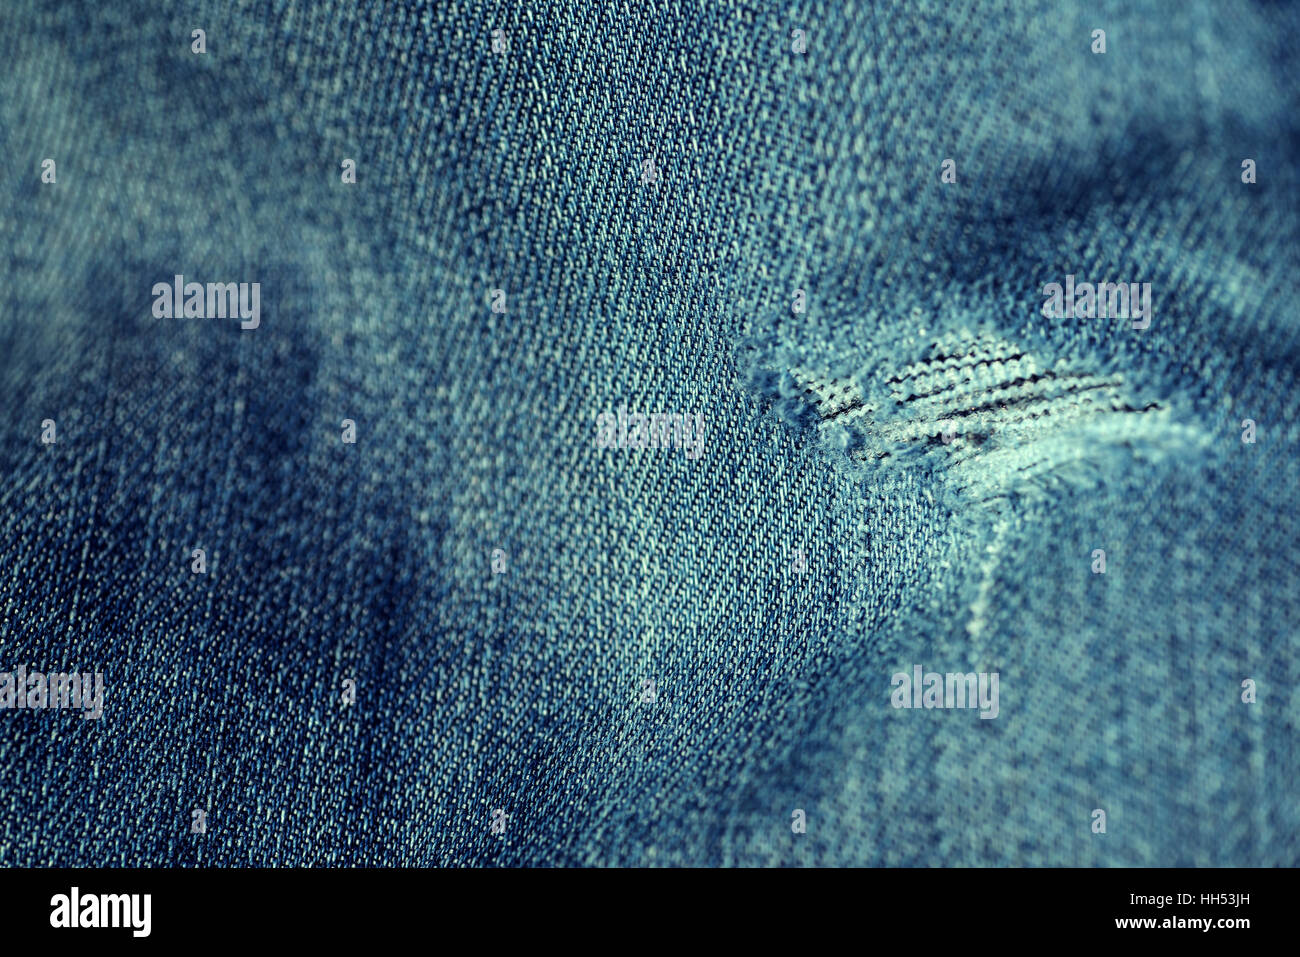 Word and faded denim jean material with a frayed hole in a horizontal composition in color. Stock Photo